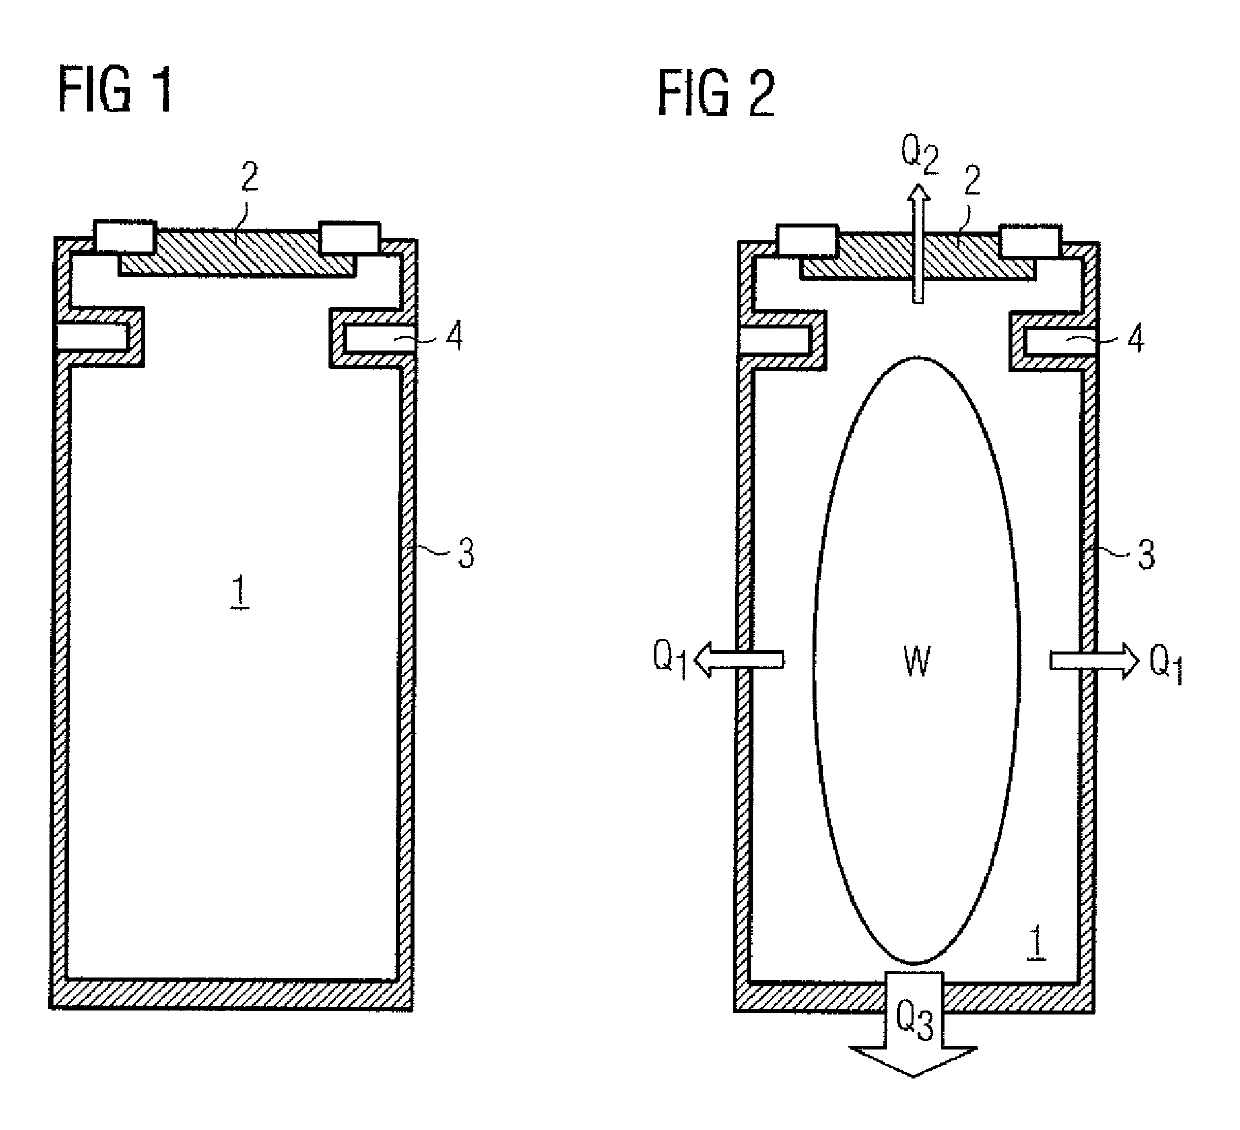 Contacting apparatus for contacting an energy storage cell